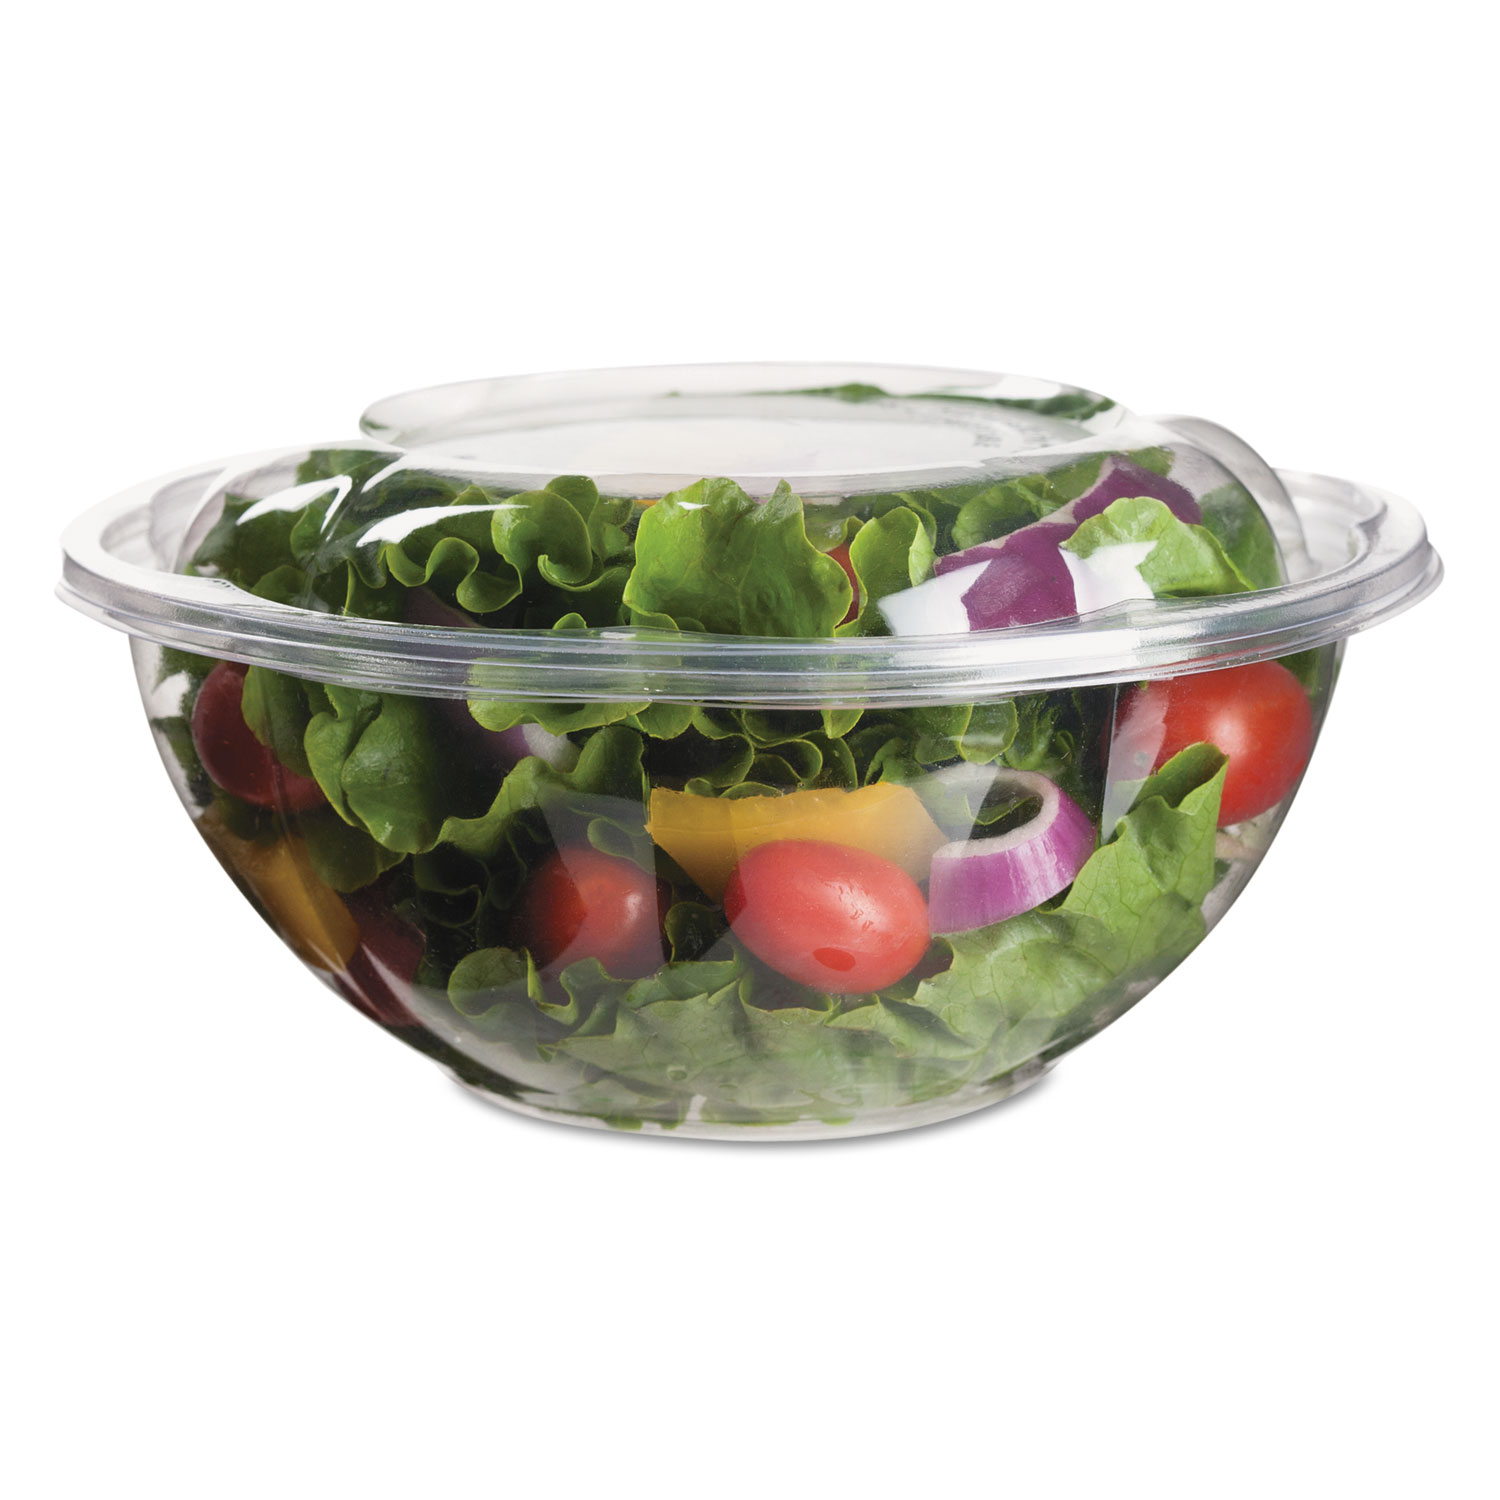  Eco-Products EP-SB24 Renewable and Compostable Salad Bowls with Lids - 24 oz, 50/Pack, 3 Packs/Carton (ECOEPSB24) 